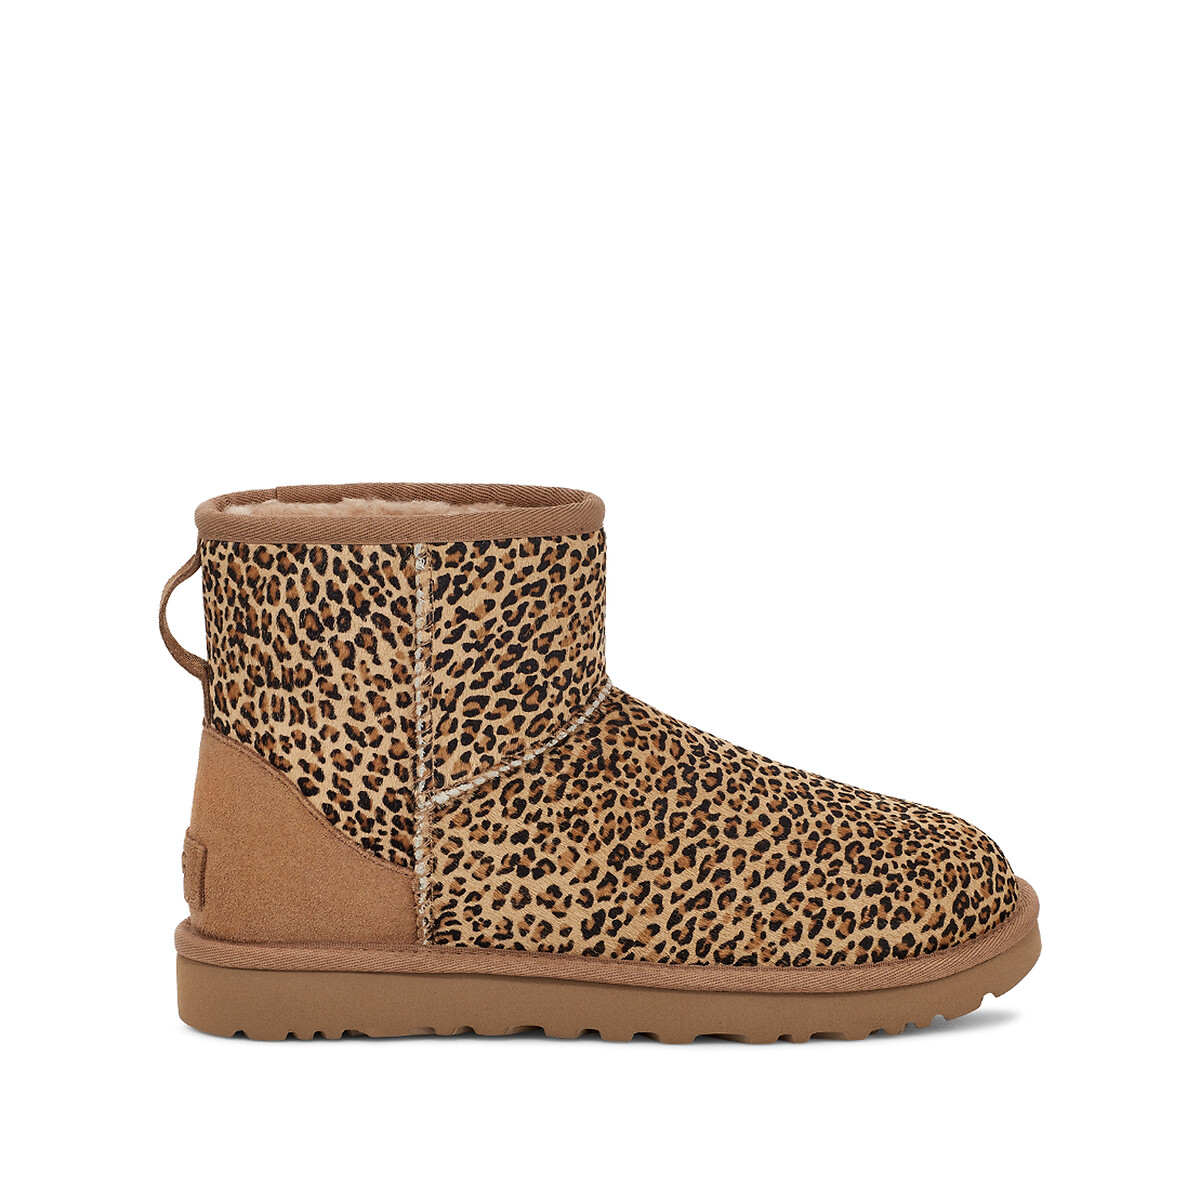 W Classic Mini Speckles Ankle Boots in Leopard Print Suede with Faux Fur Lining